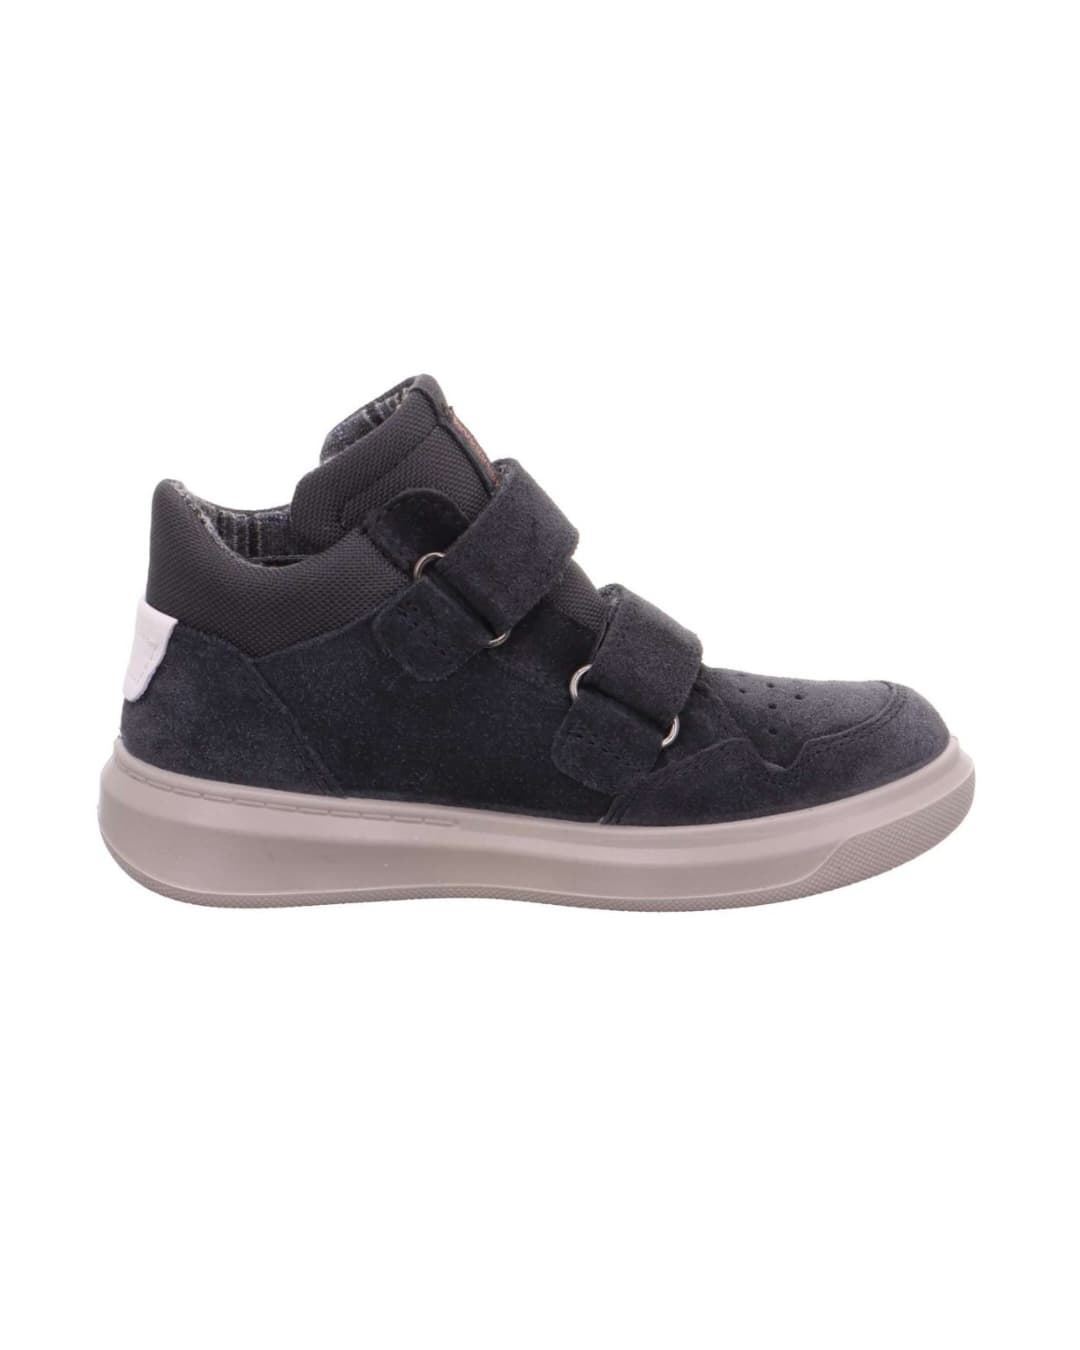 Superfit Gore-tex Boots for Kids Gray Suede - Image 3